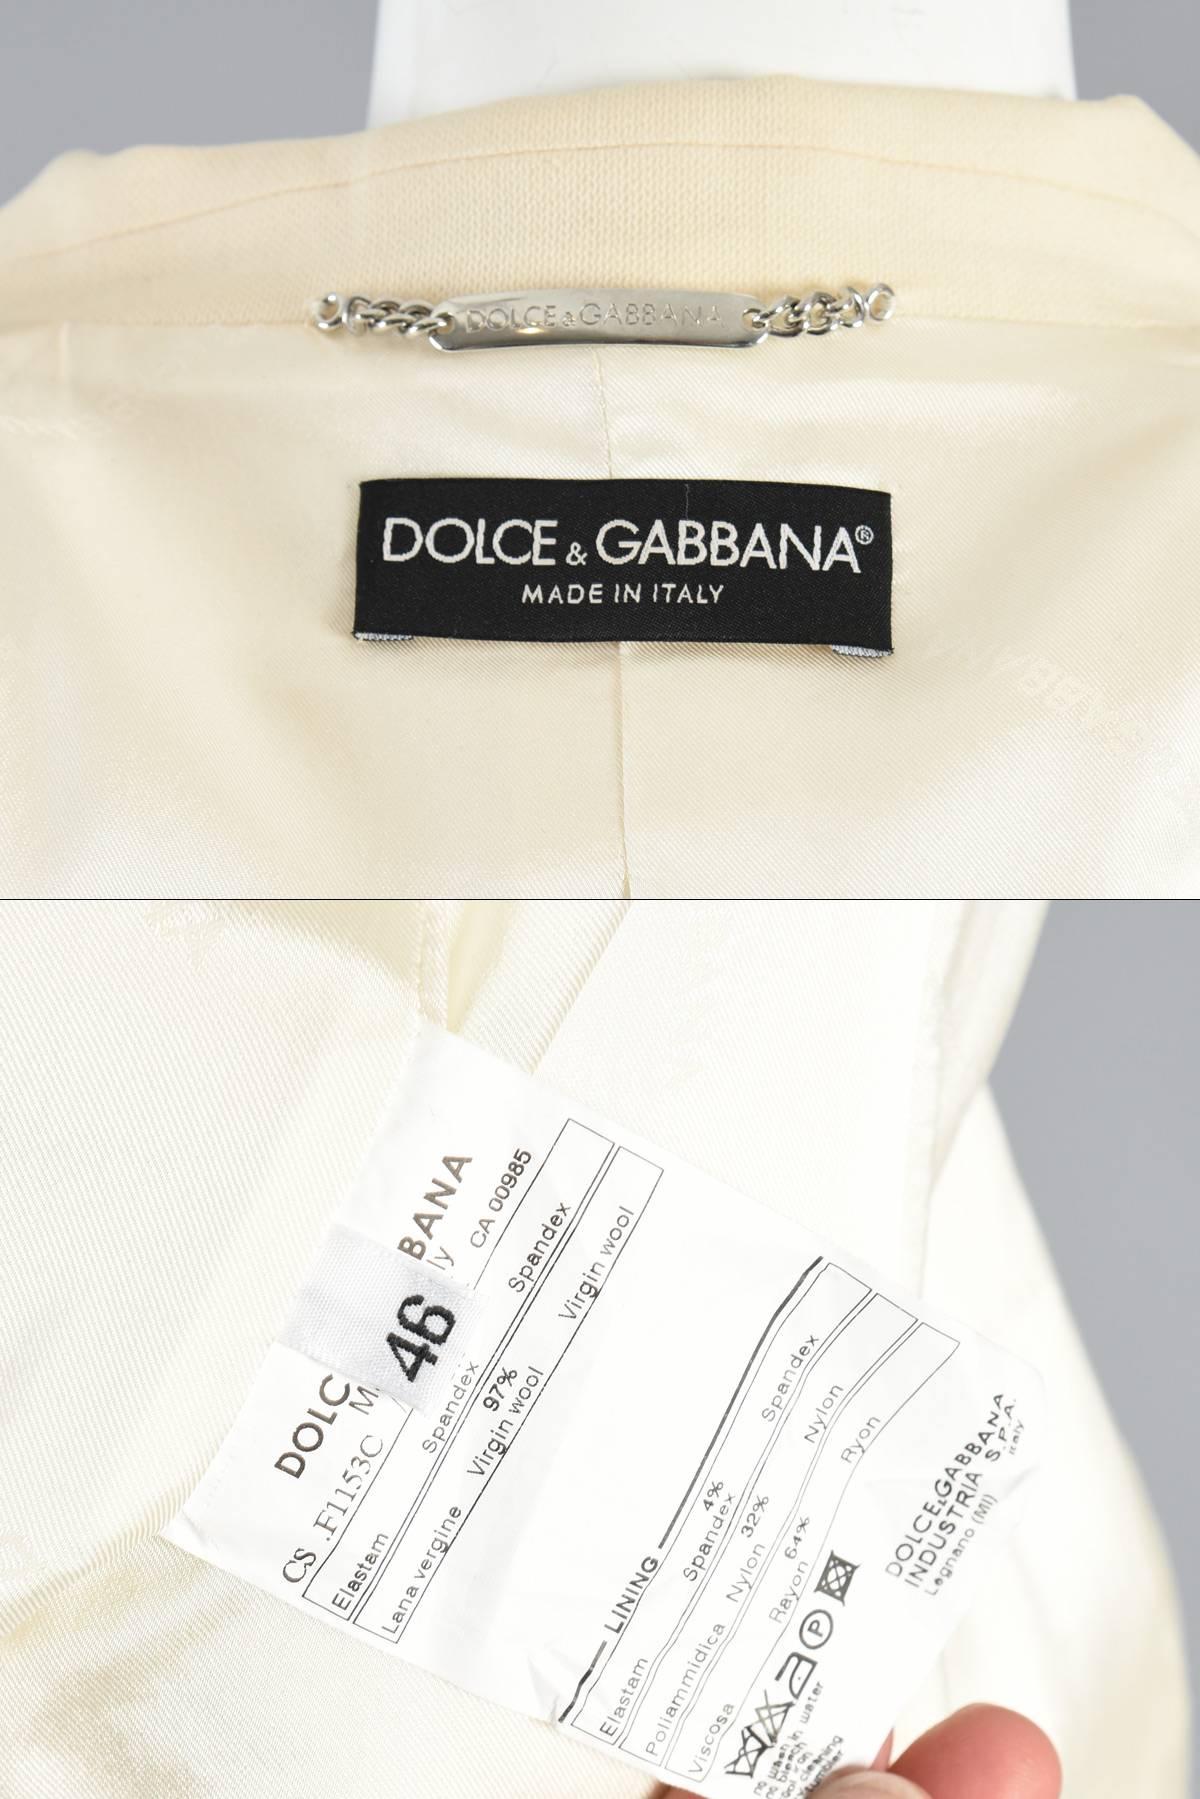 Dolce & Gabbana Ivory Tuxedo Suit For Sale 4